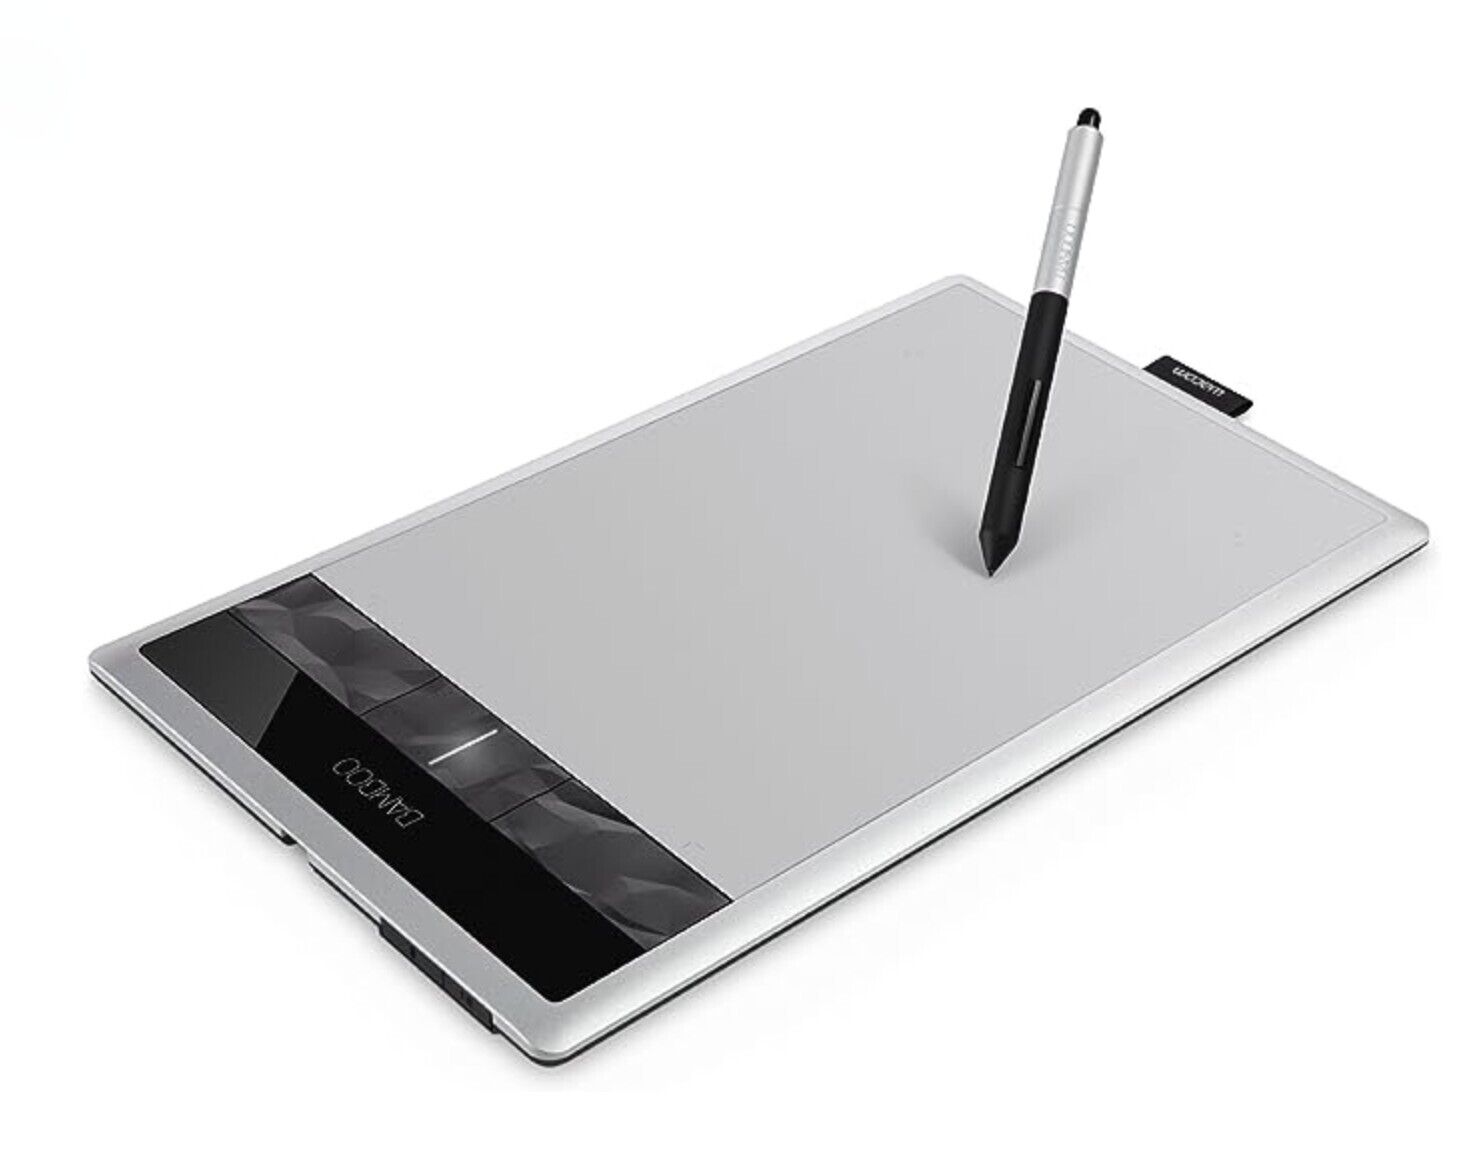 WACOM Bamboo Create Pen and Touch Tablet (CTH-670) - Silver + Black